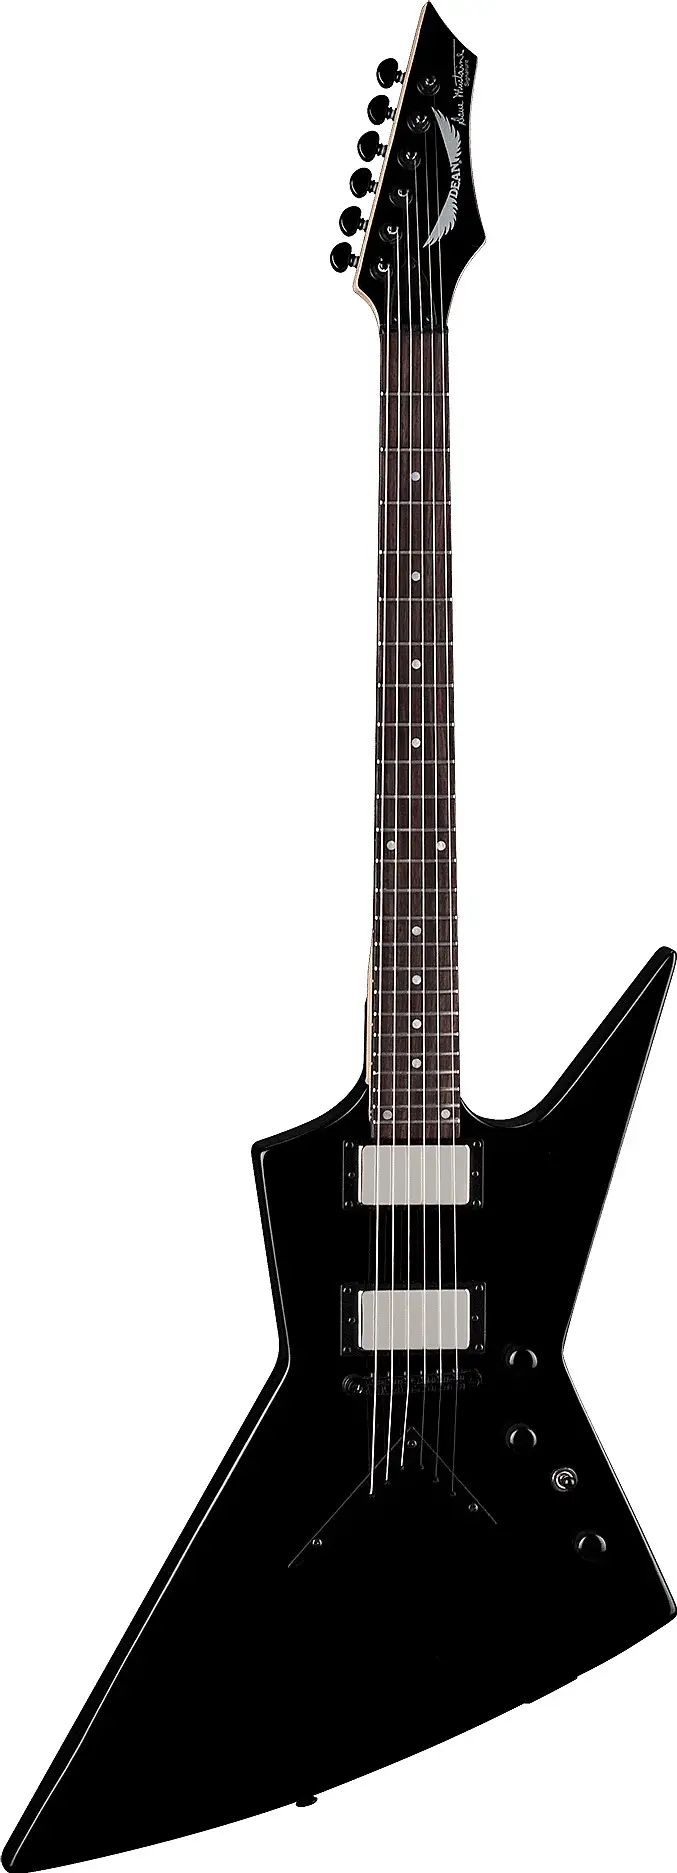 Dean Zero X Dave Mustaine Review | Chorder.com